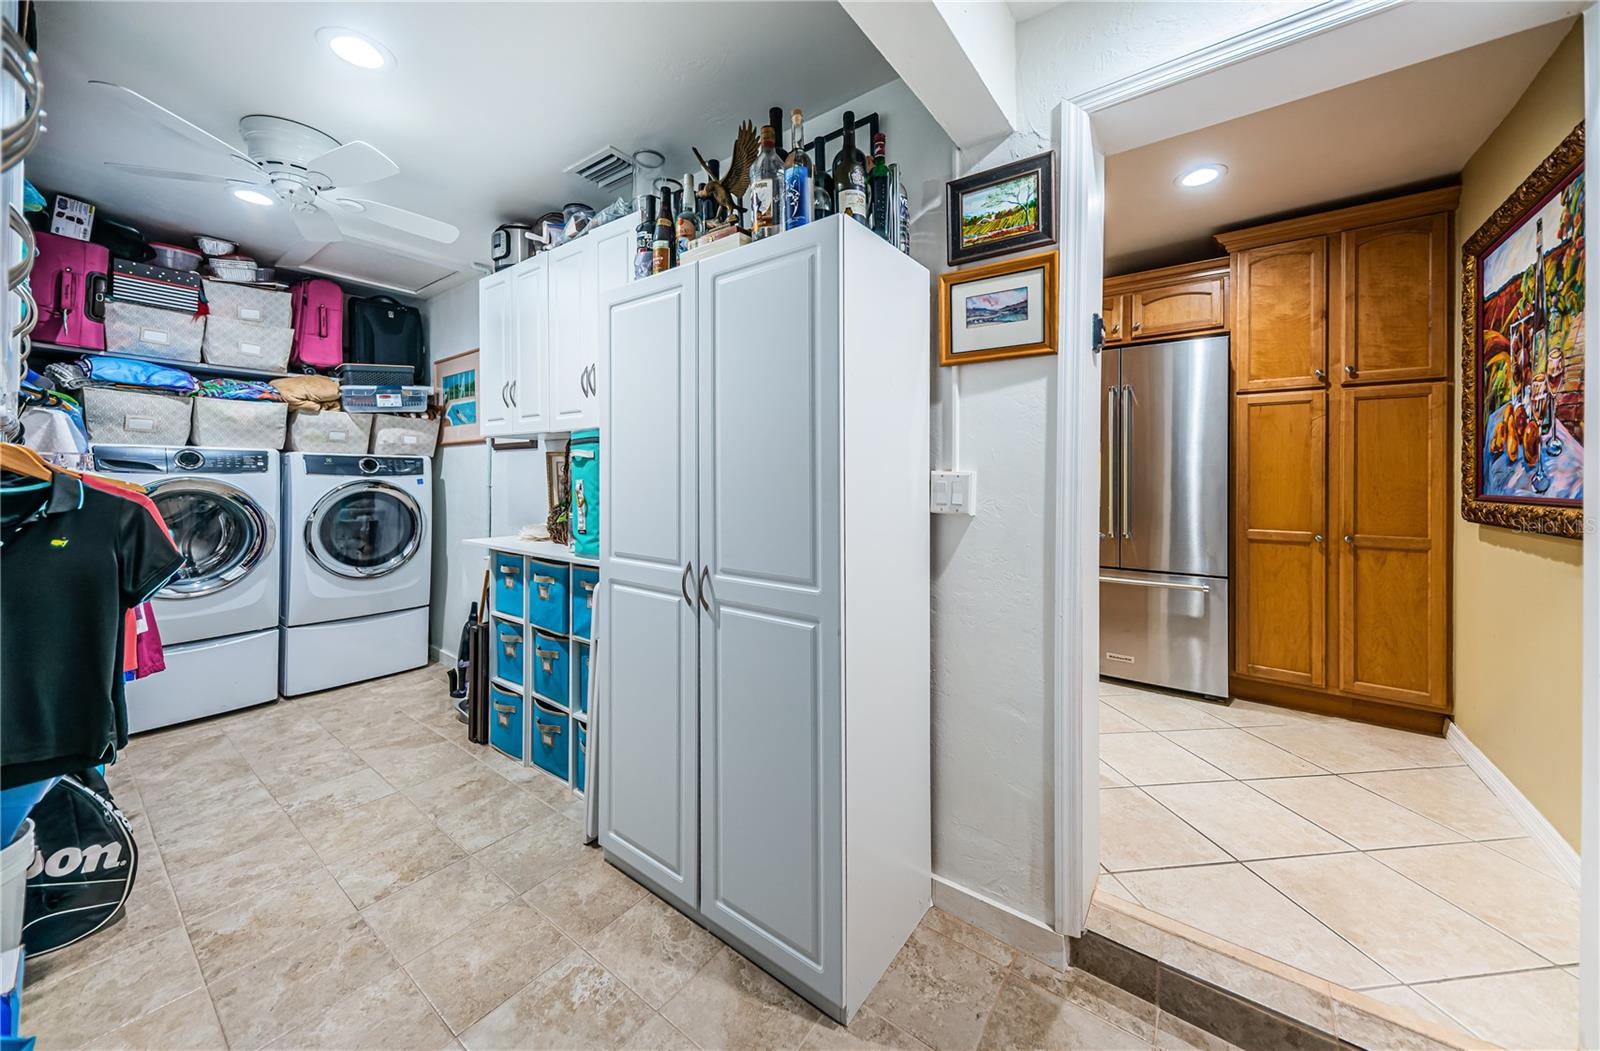 Large laundry room adjacent to the kitchen.